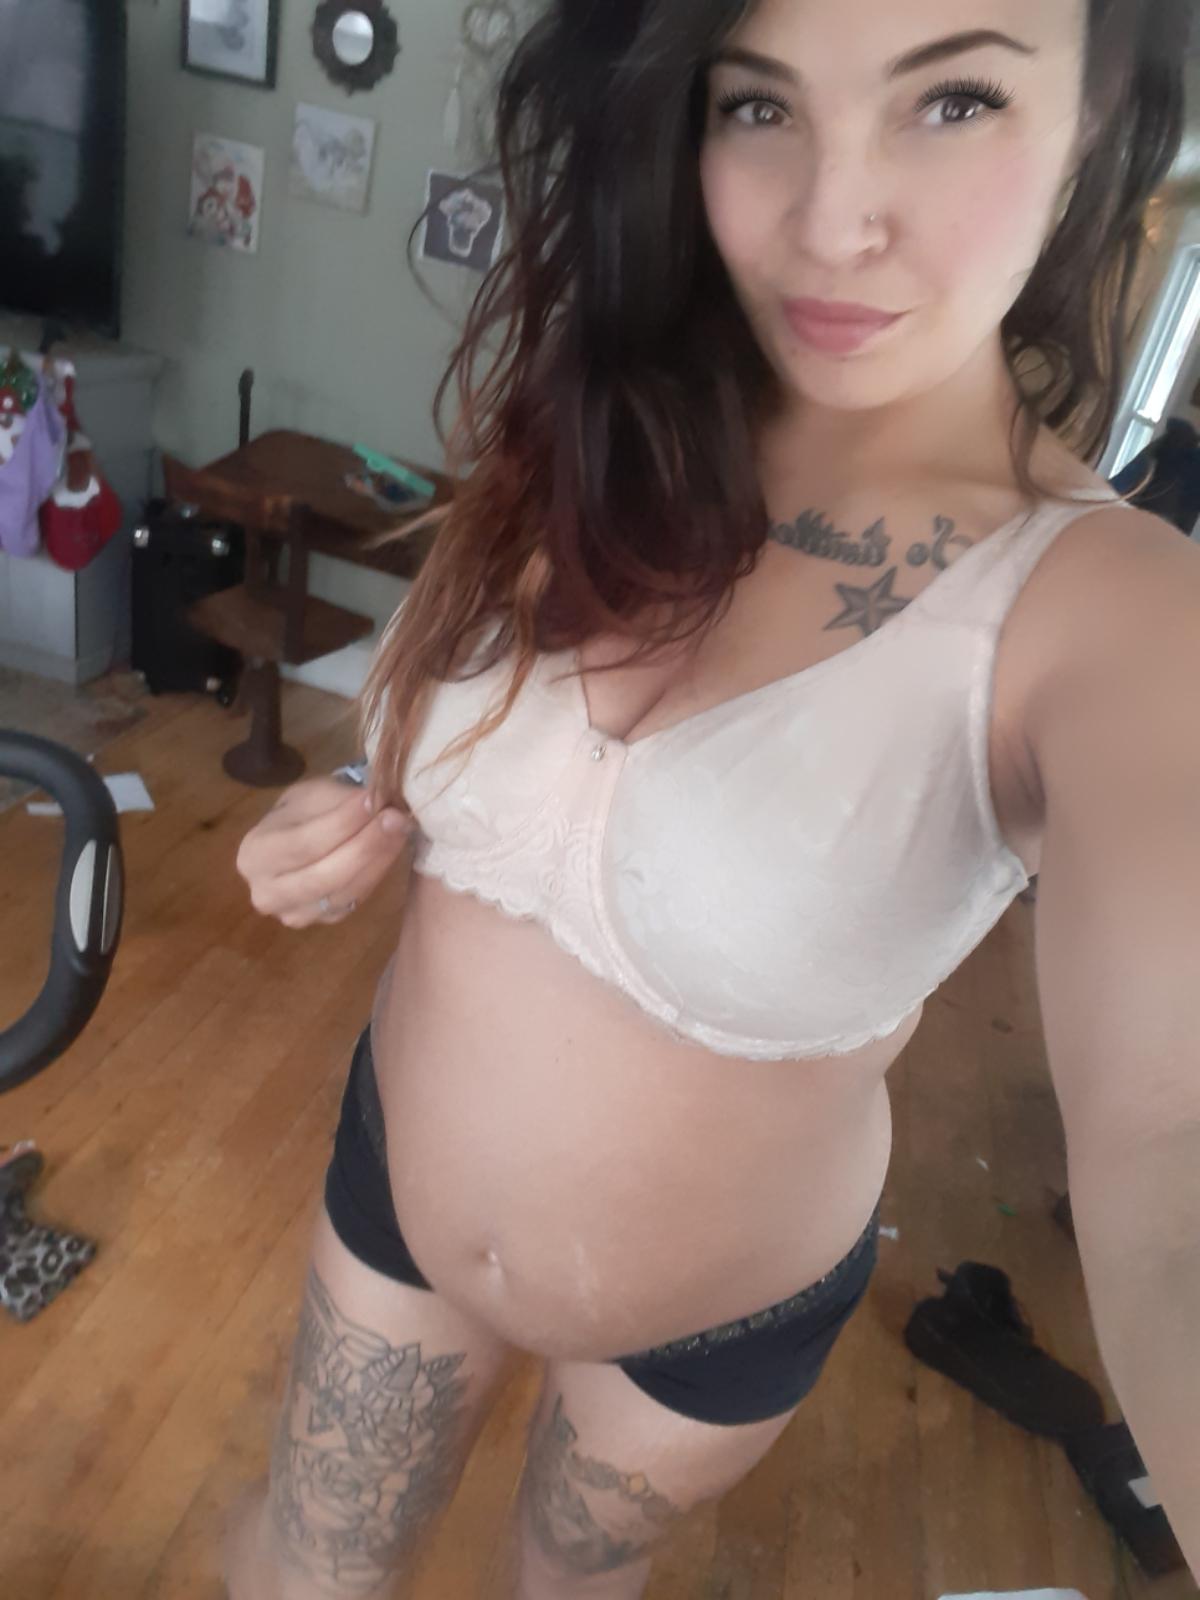 Not Sure If I Belong Here. Tattooed Almost Mother Of 3 ?